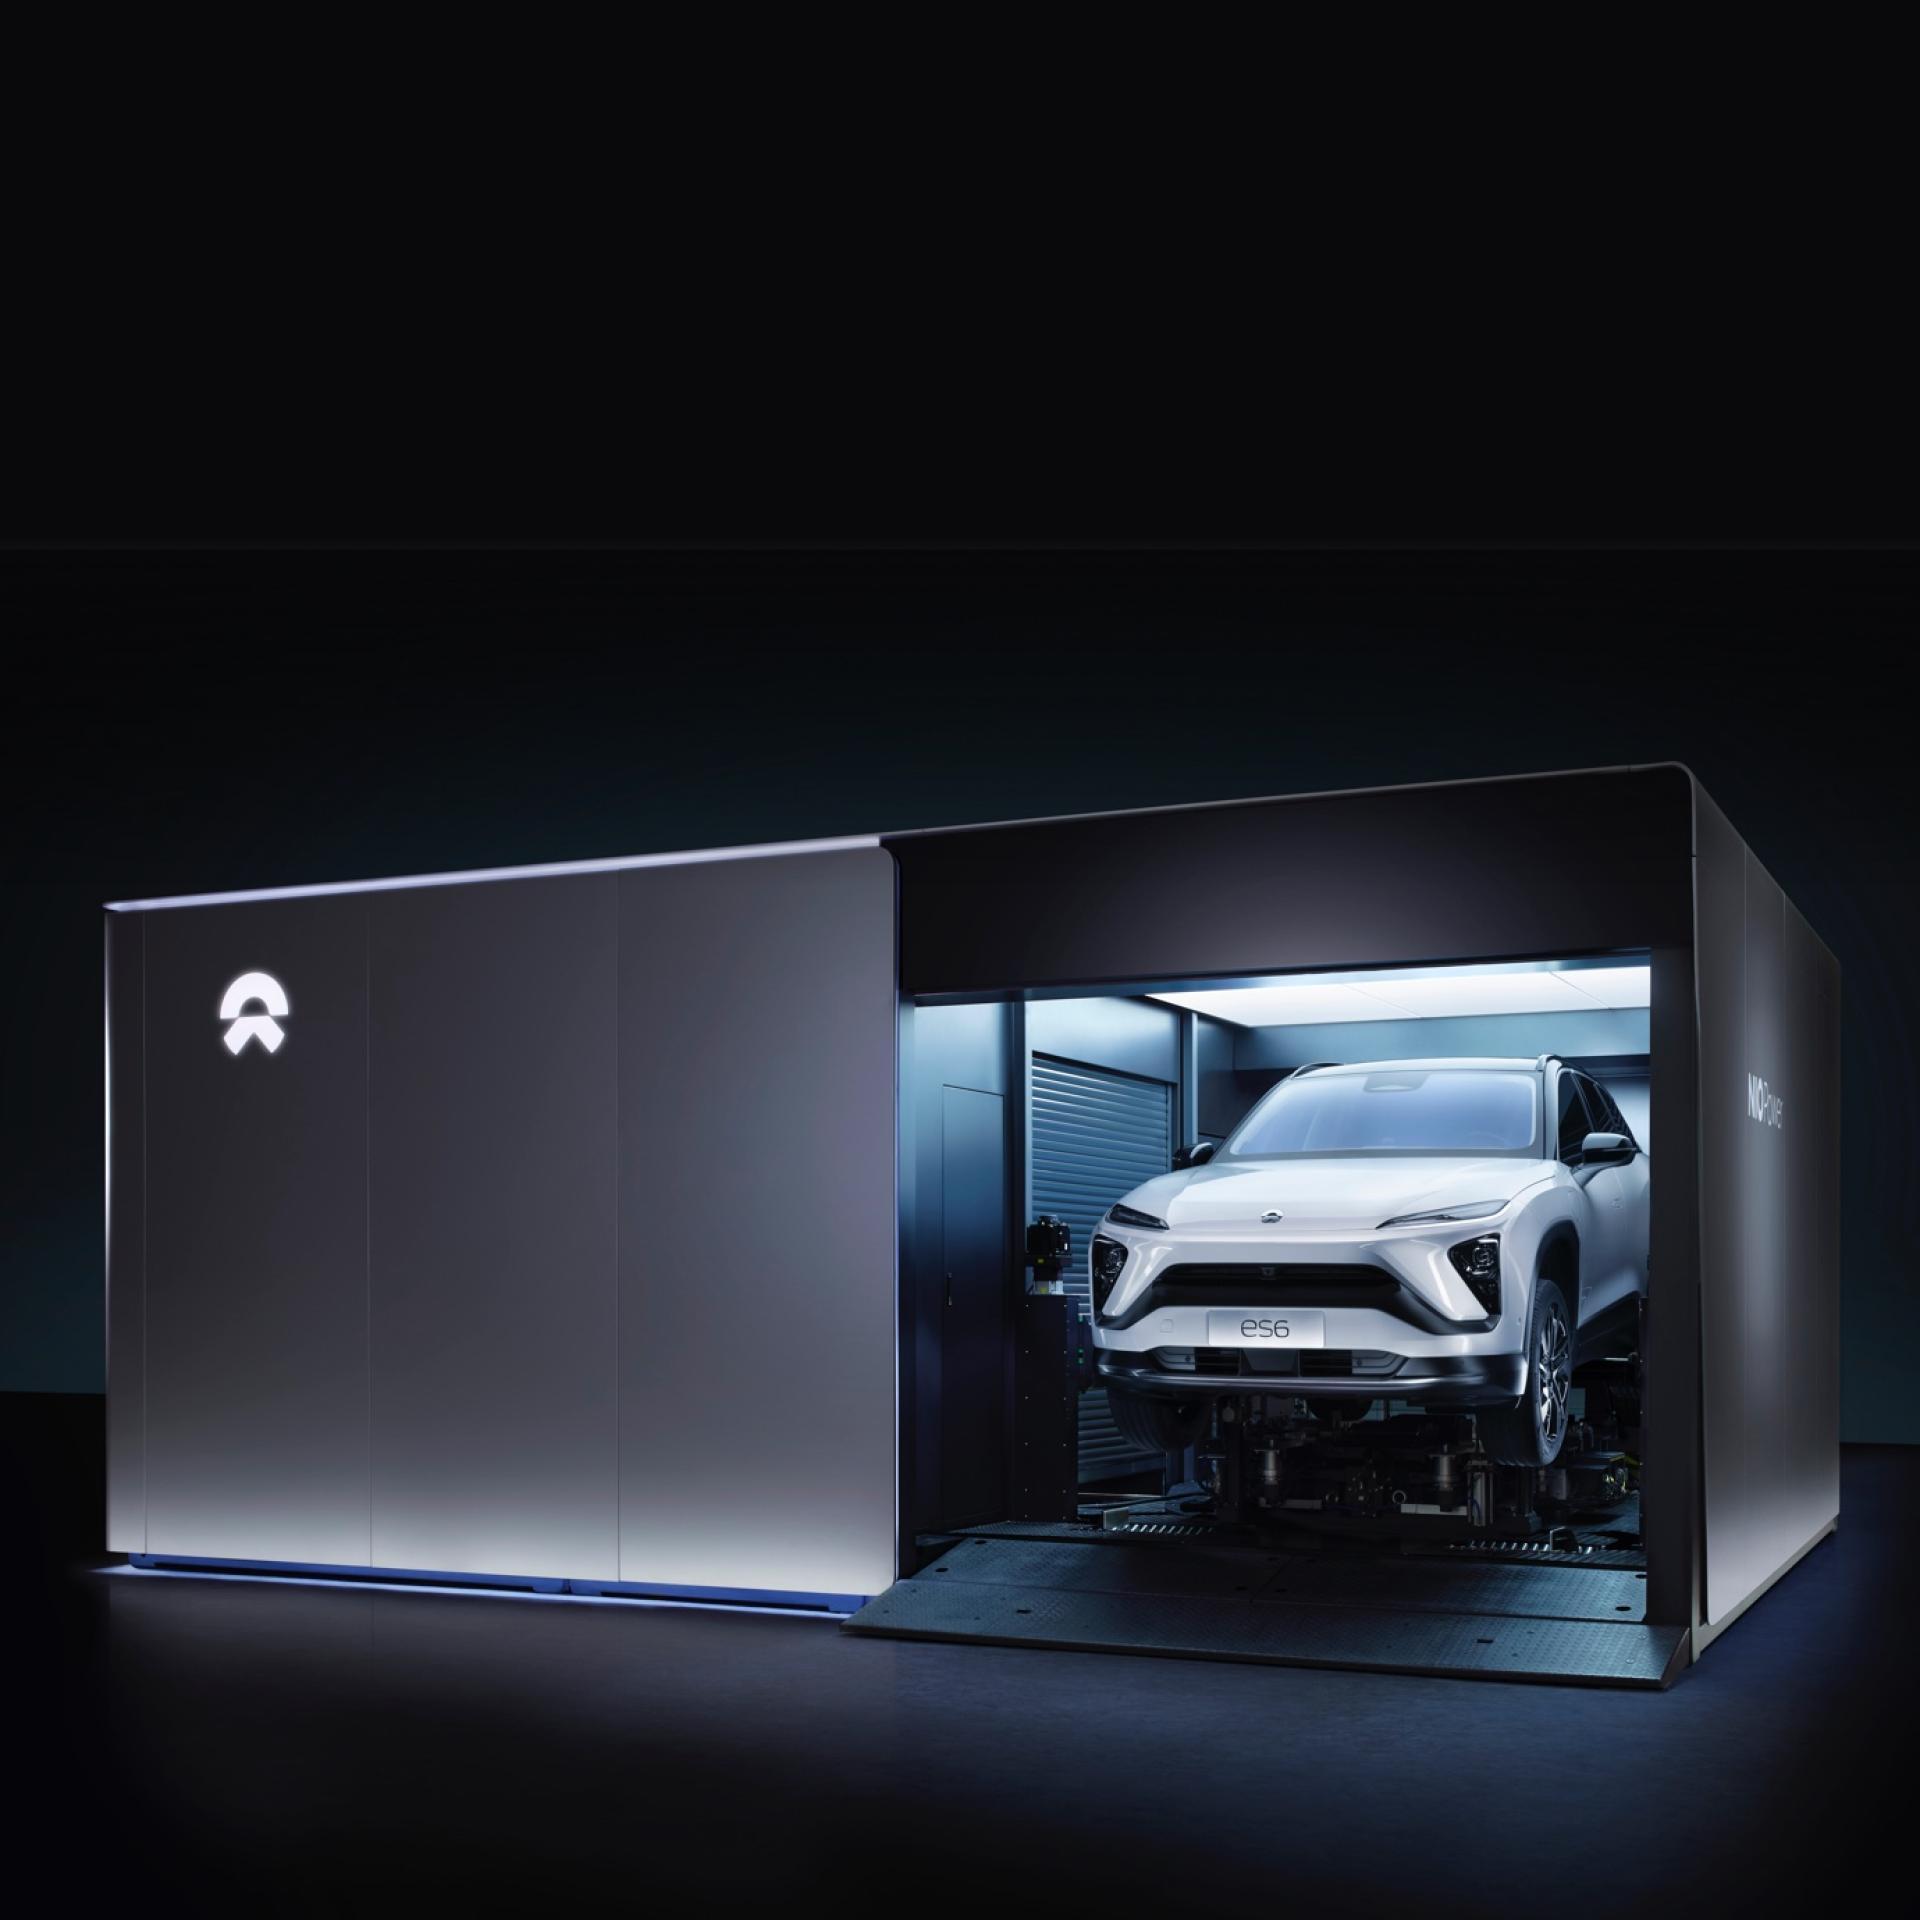 NIO's Stock Forecast: Where Will It Be in 2025?